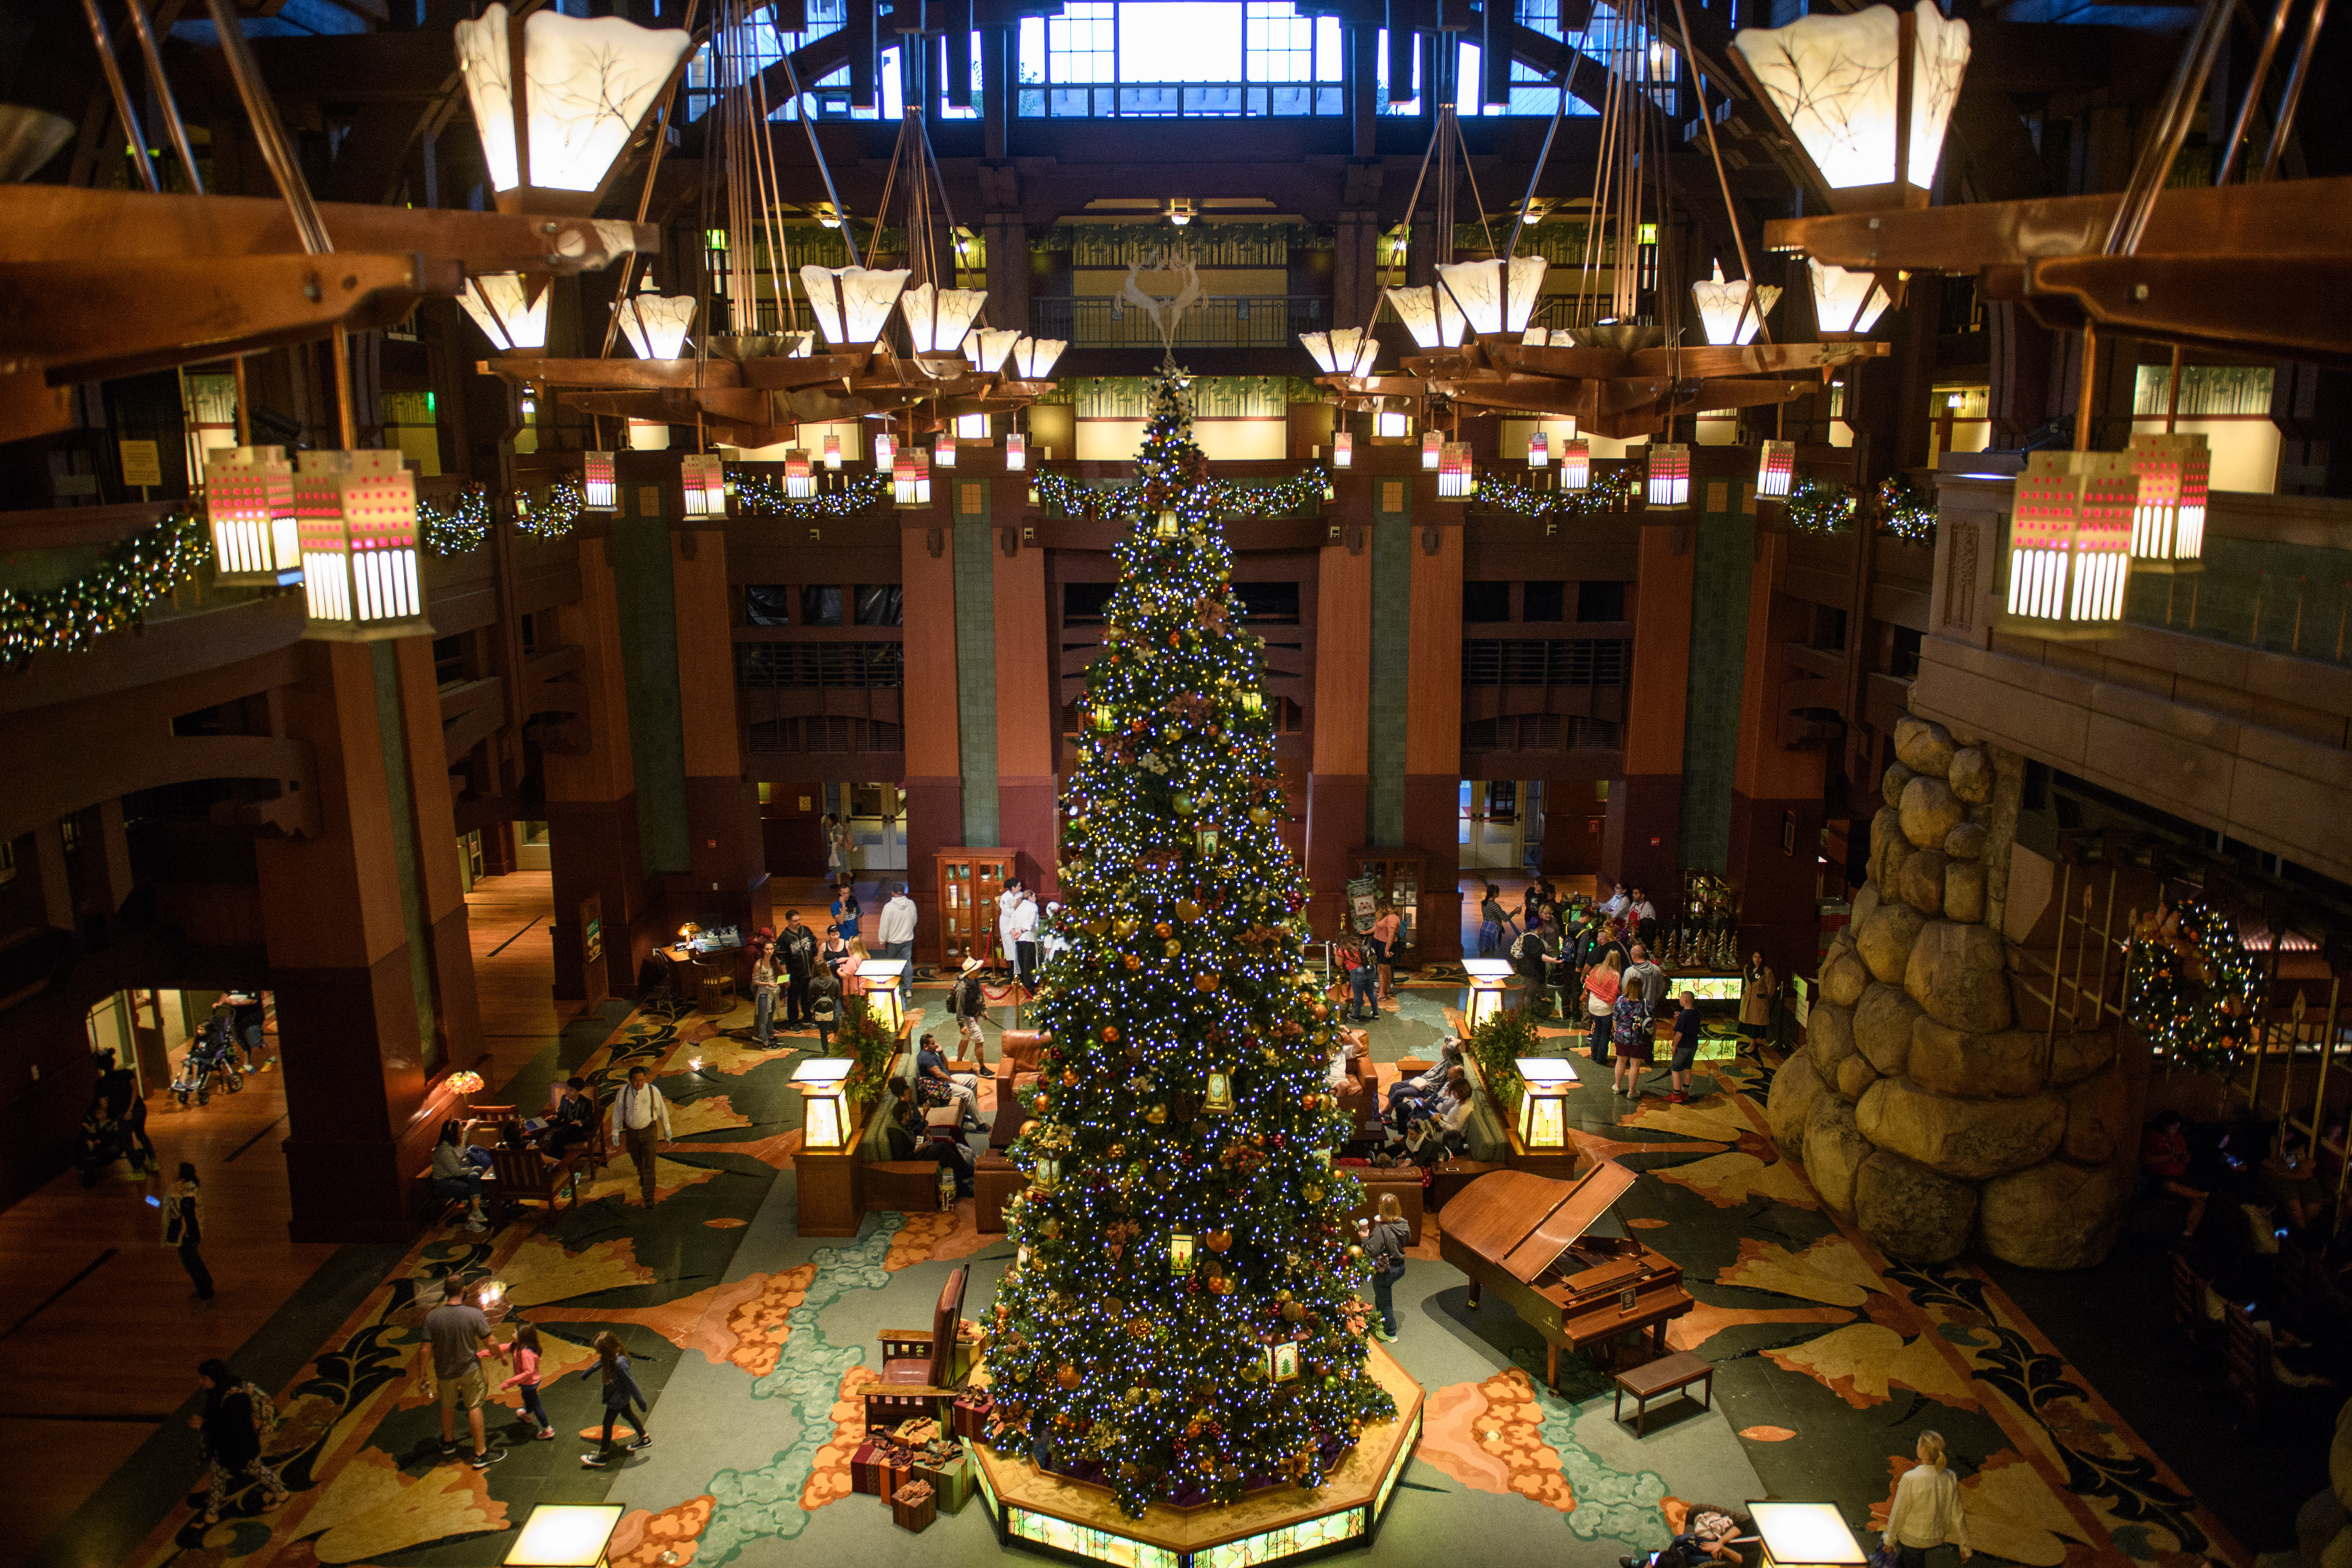 Six Reasons to Stay at the Hotels of the Disneyland Resort During the Holidays